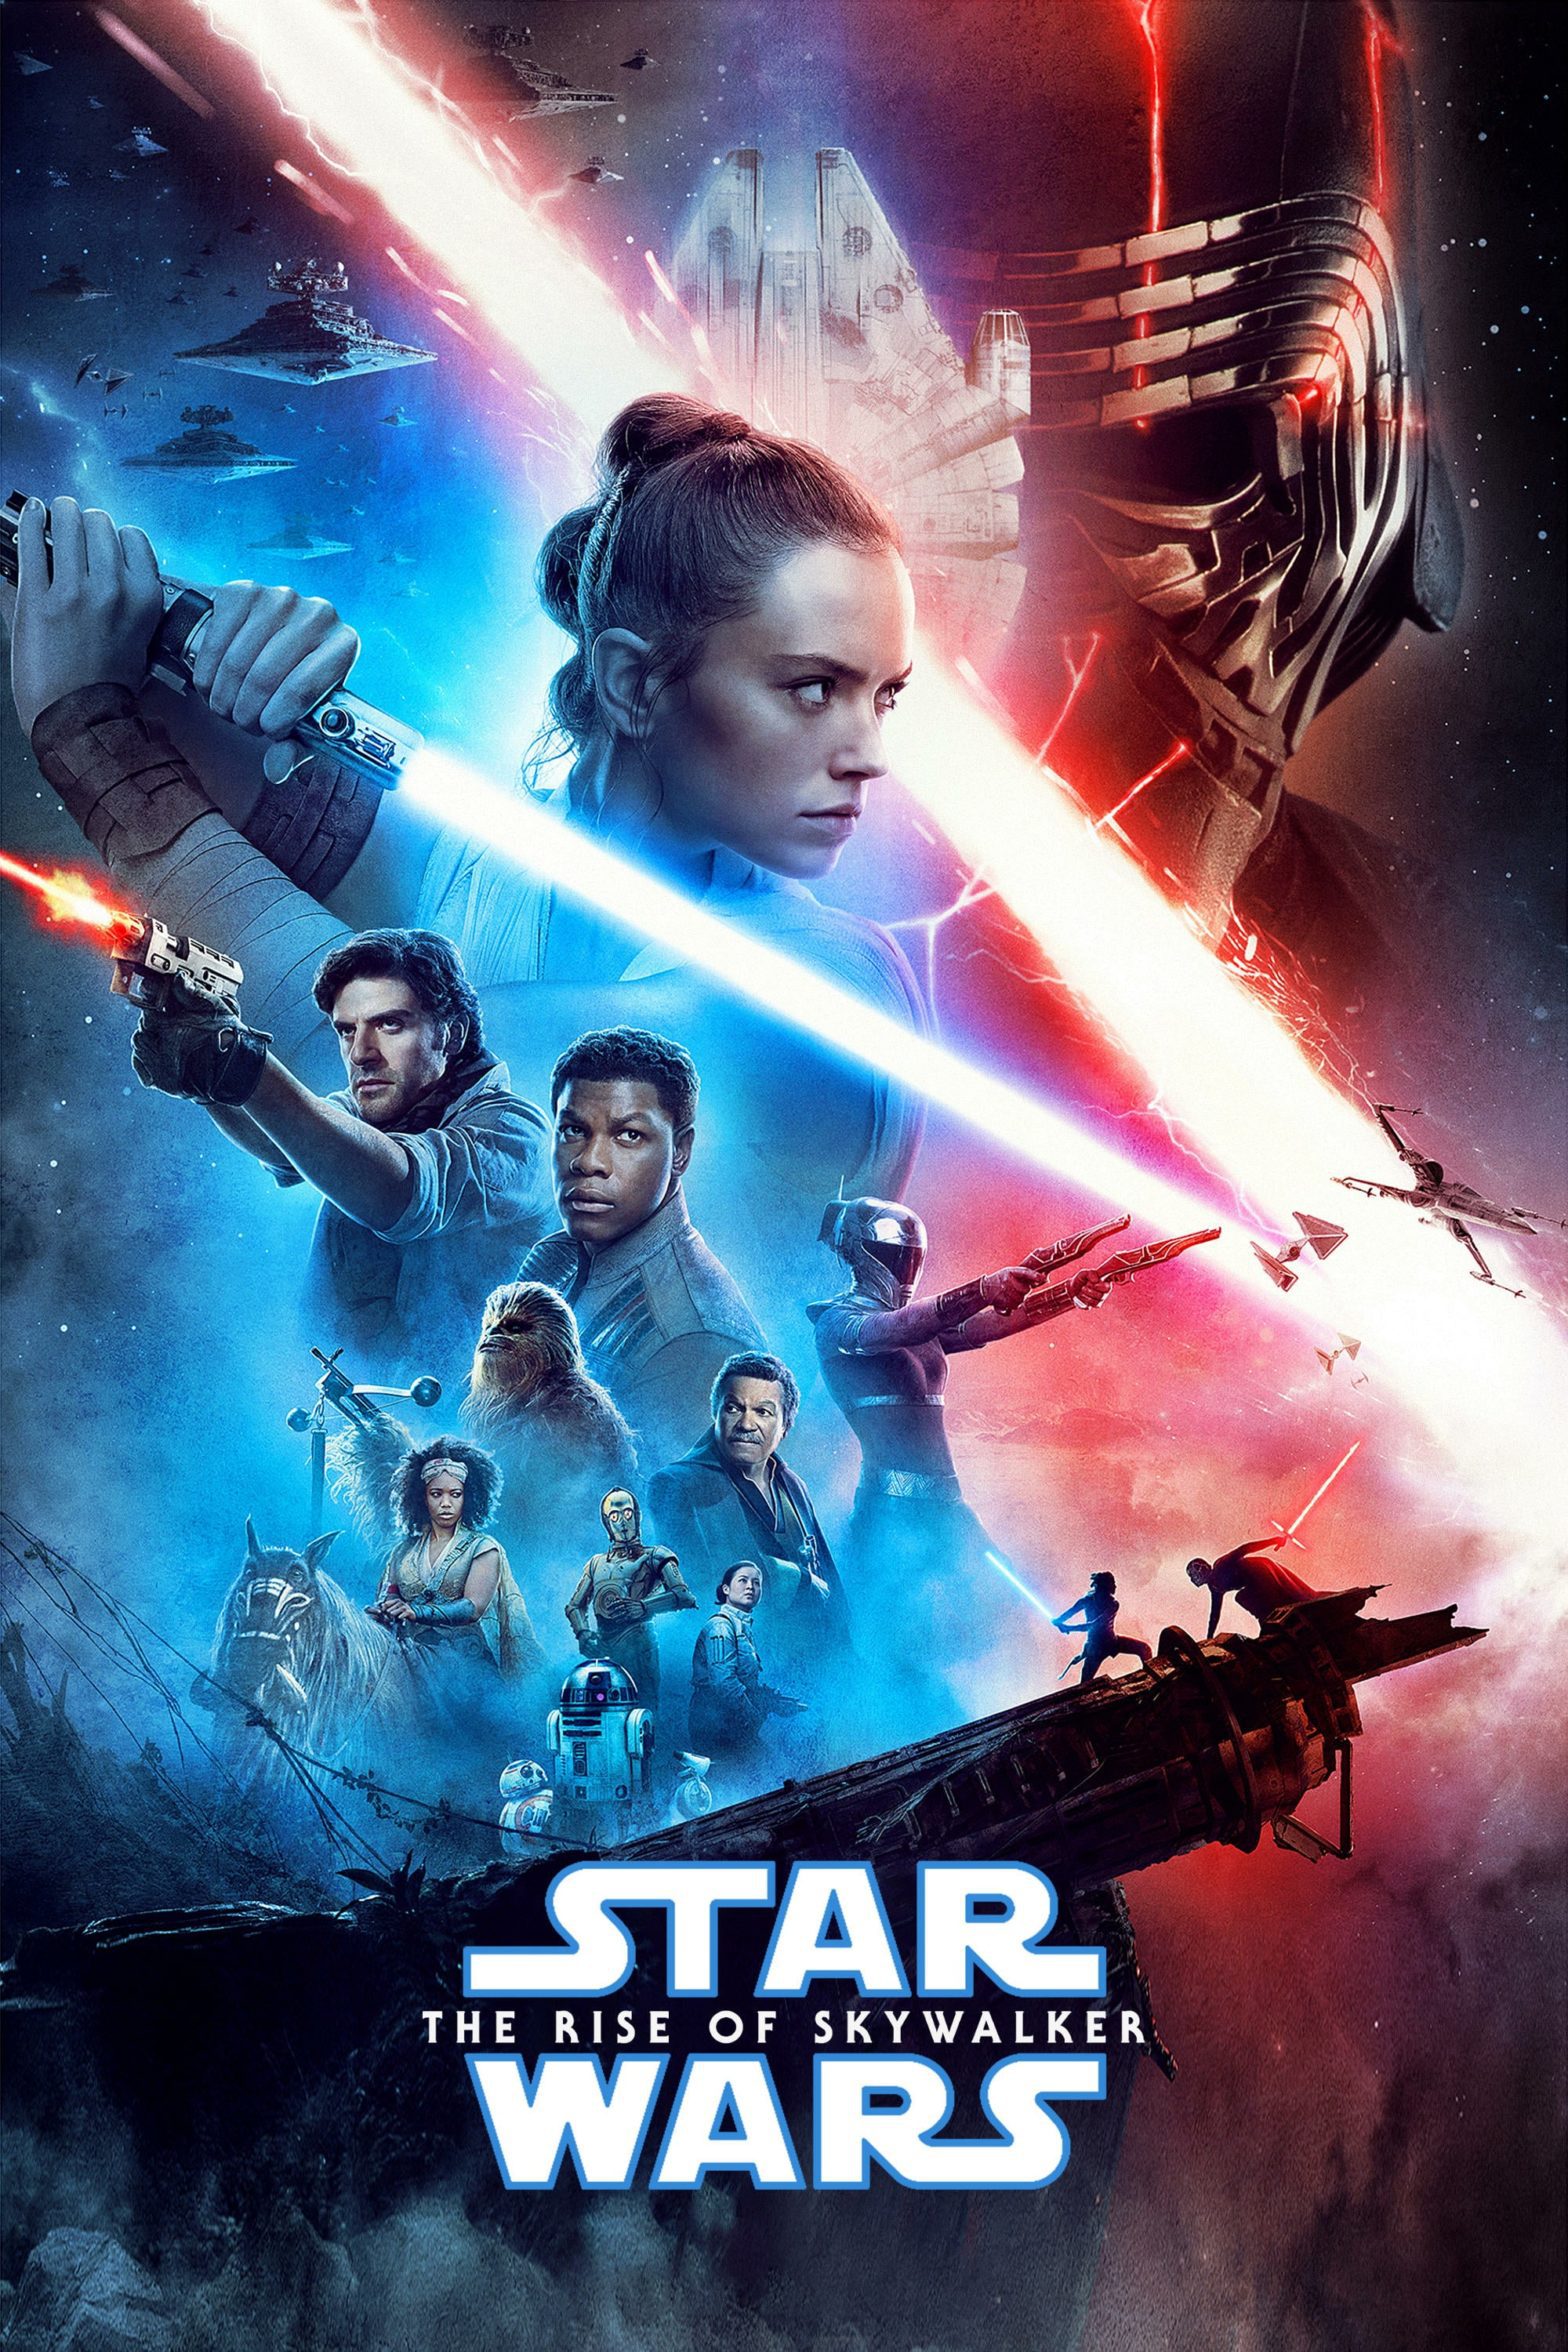 Poster for the movie "Star Wars: The Rise of Skywalker"